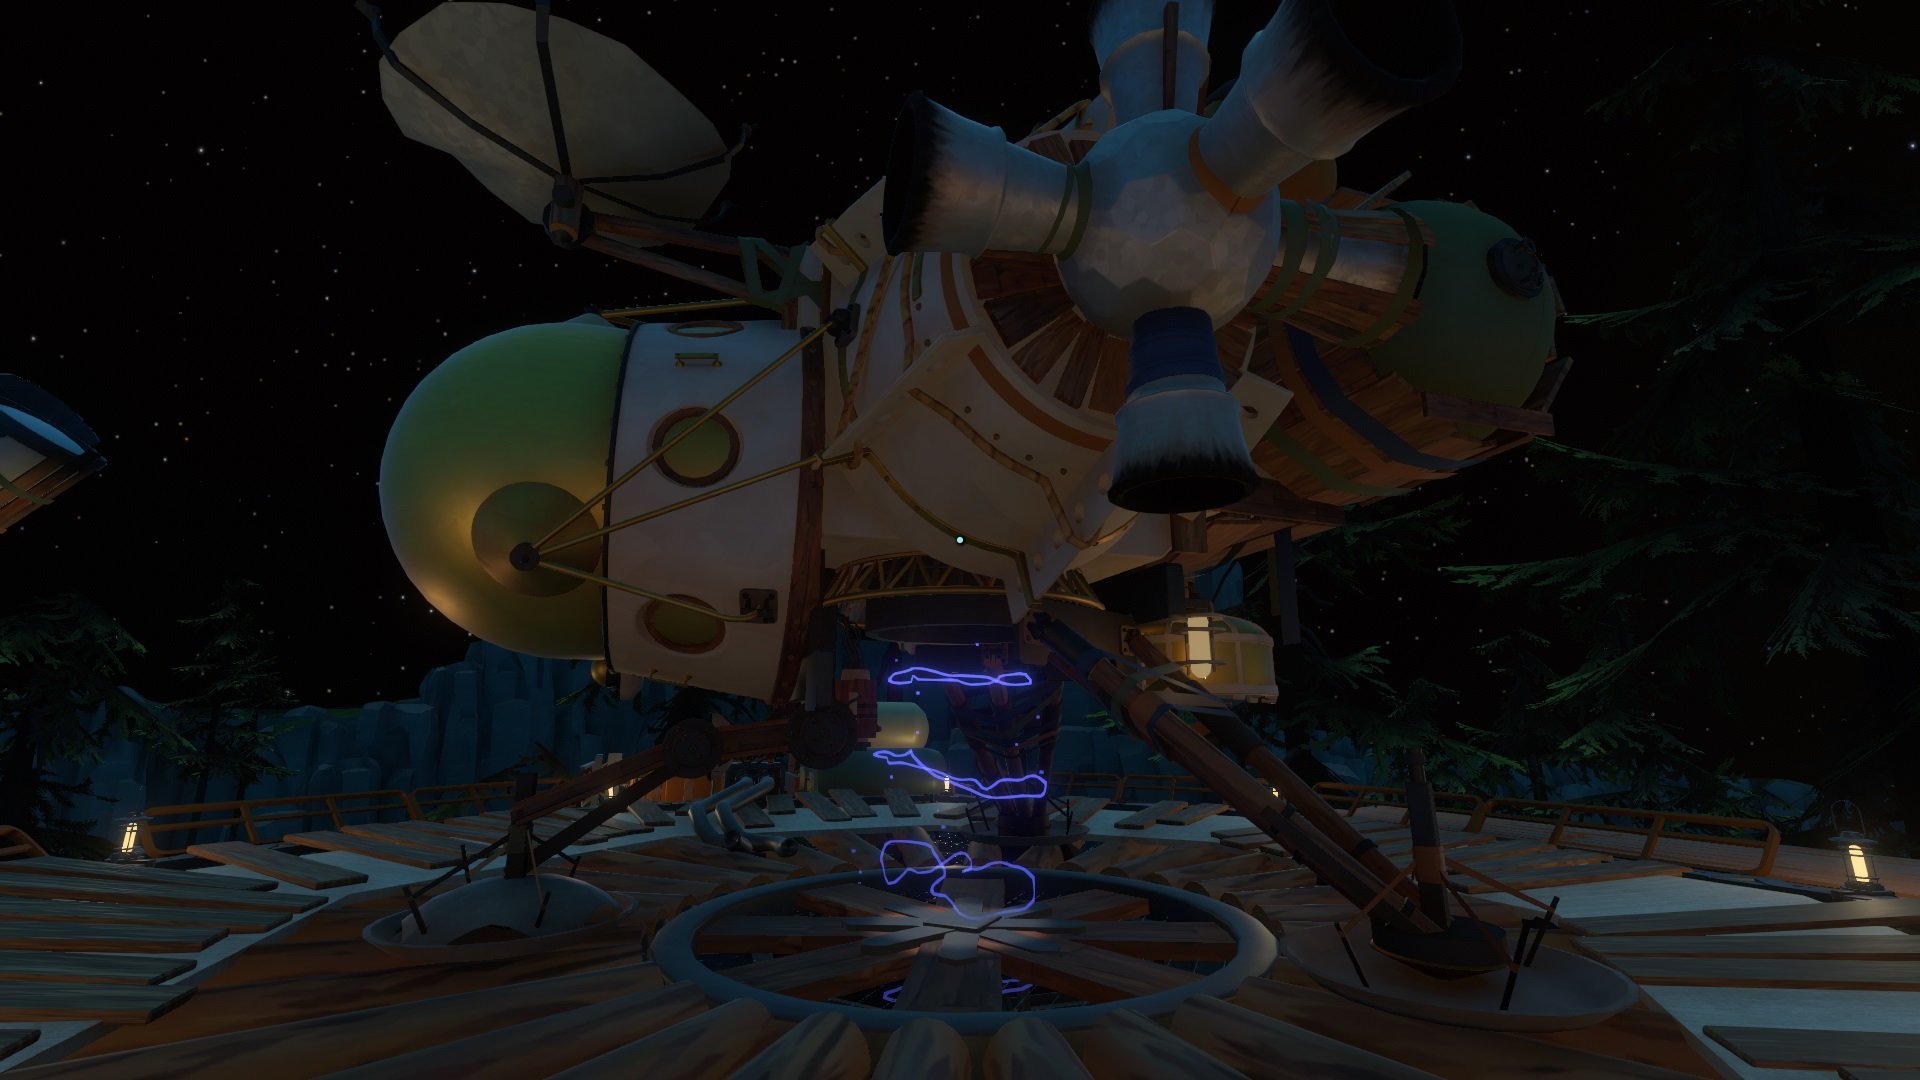 Outer Wilds Review  Out of this world - GameRevolution